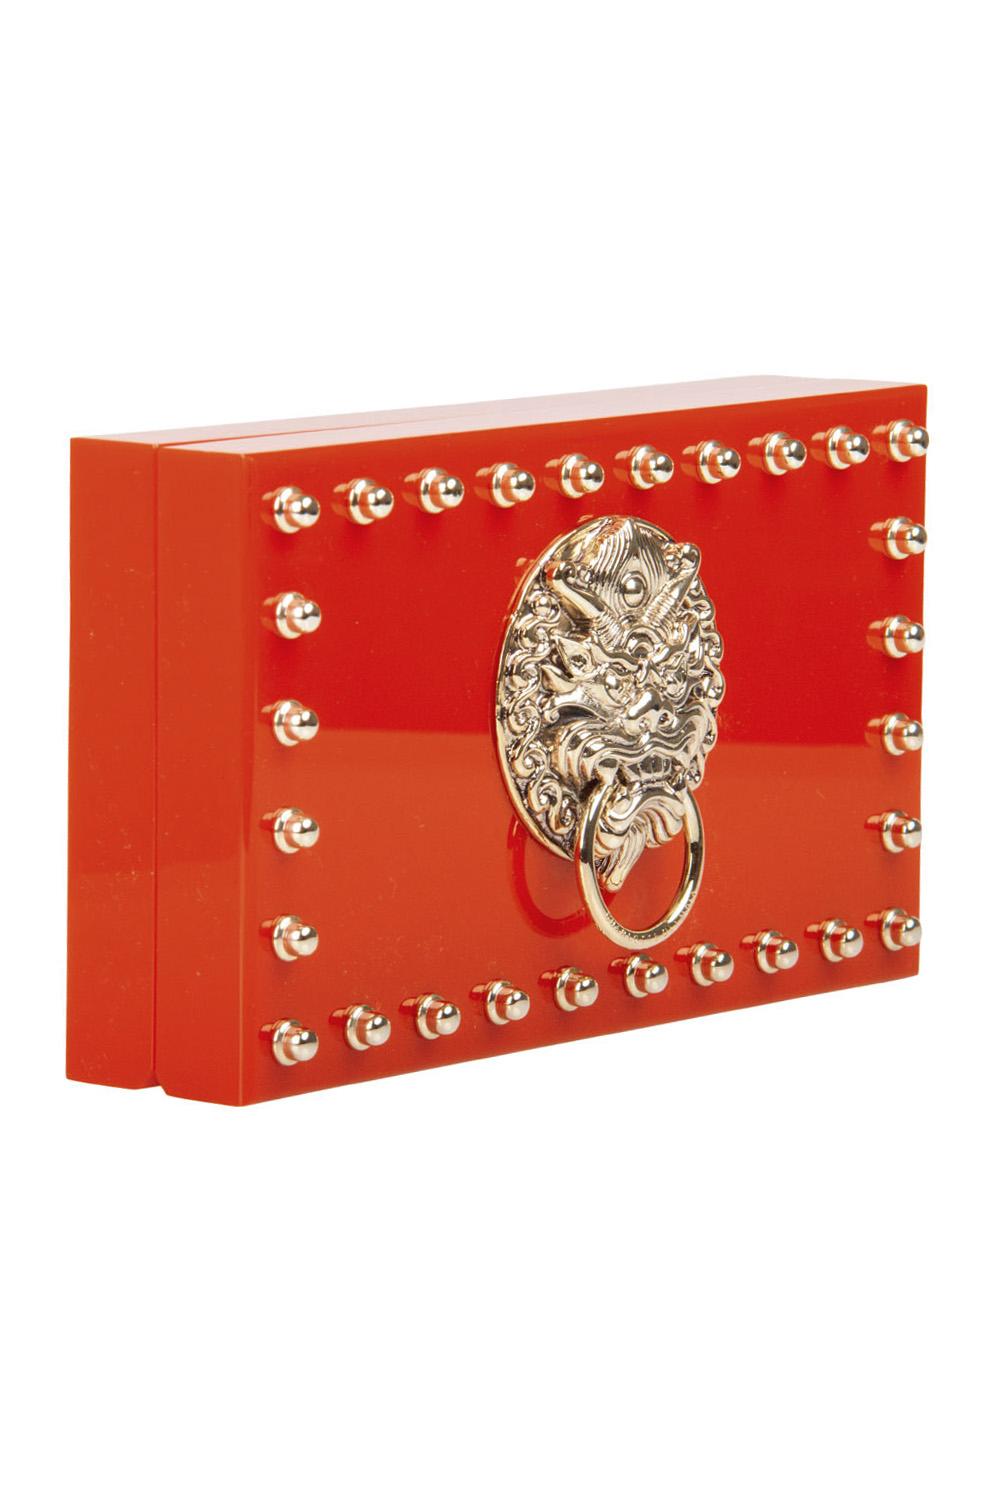 This edgy version of the famous Pandora Box clutch from Charlotte Olympia comes with a royal touch. Crafted from red Perspex, it has been styled with gold-tone studs and a motif at the centre and equipped with an interior housing the brand label.